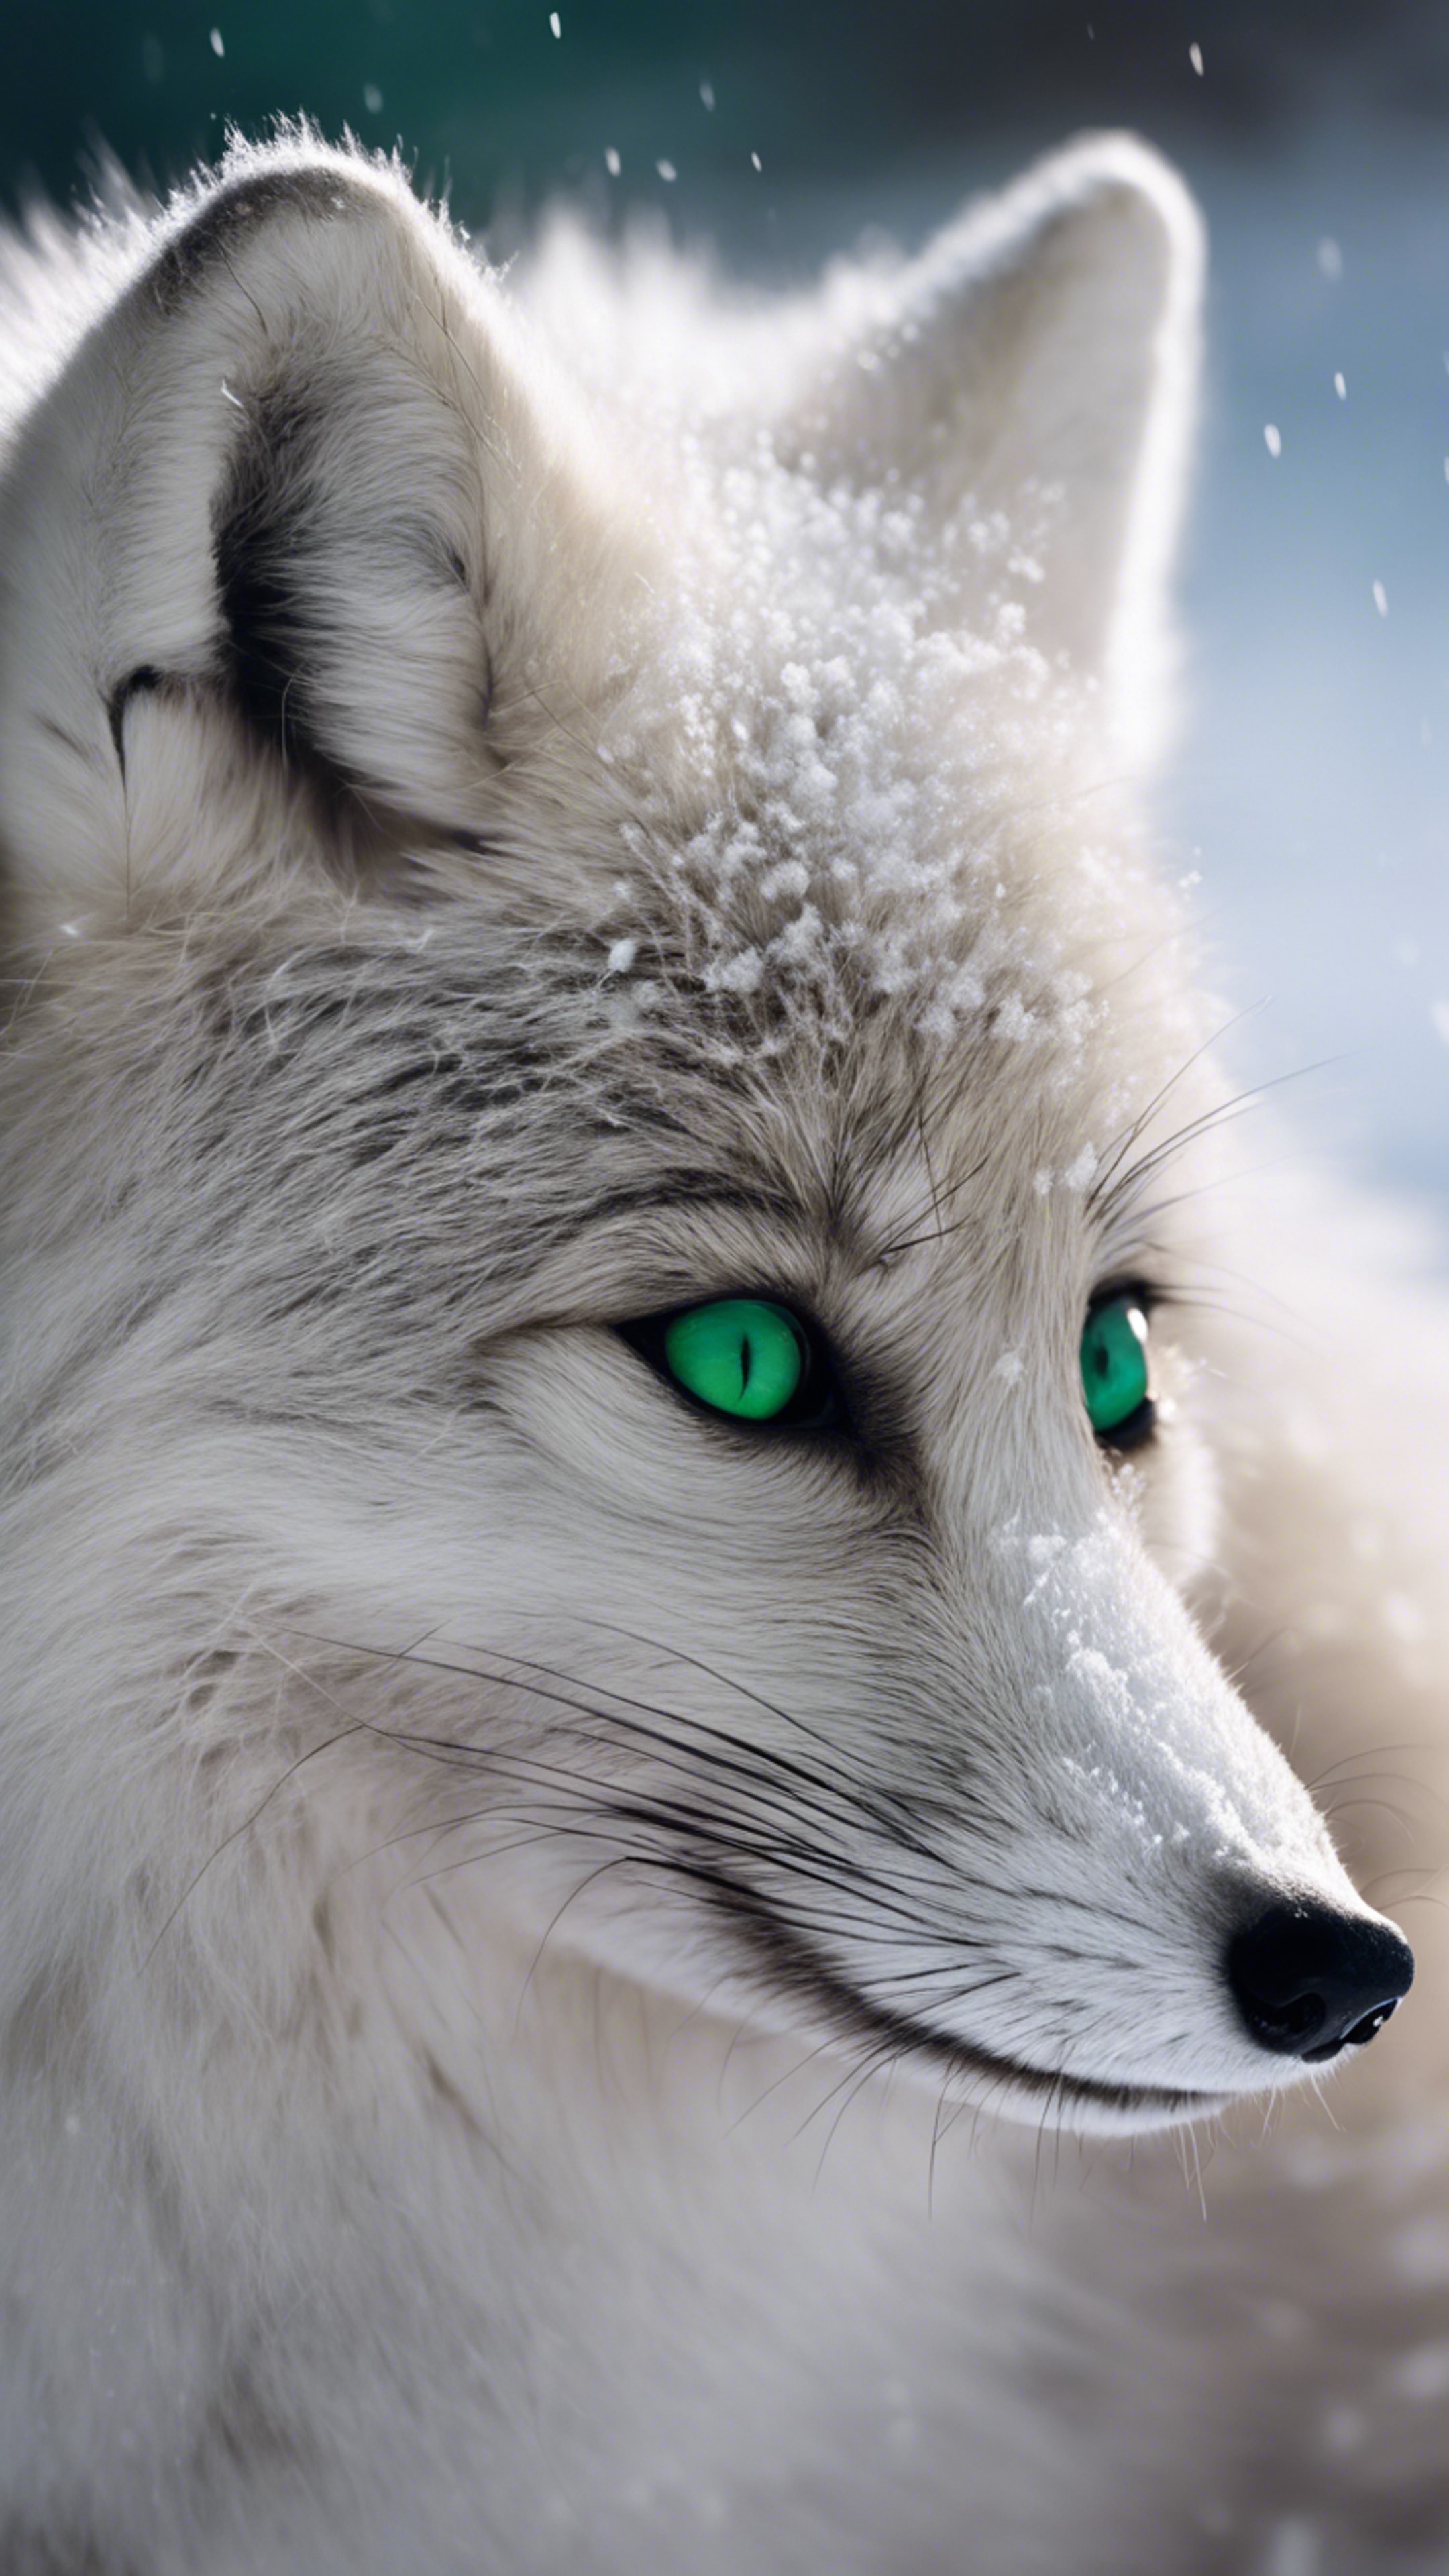 A fluffy, smoky gray arctic fox curled up in a snowy setting, its vivid green eyes staring directly at the viewer. Tapetai[a0ededdcc5bf4726bdb5]